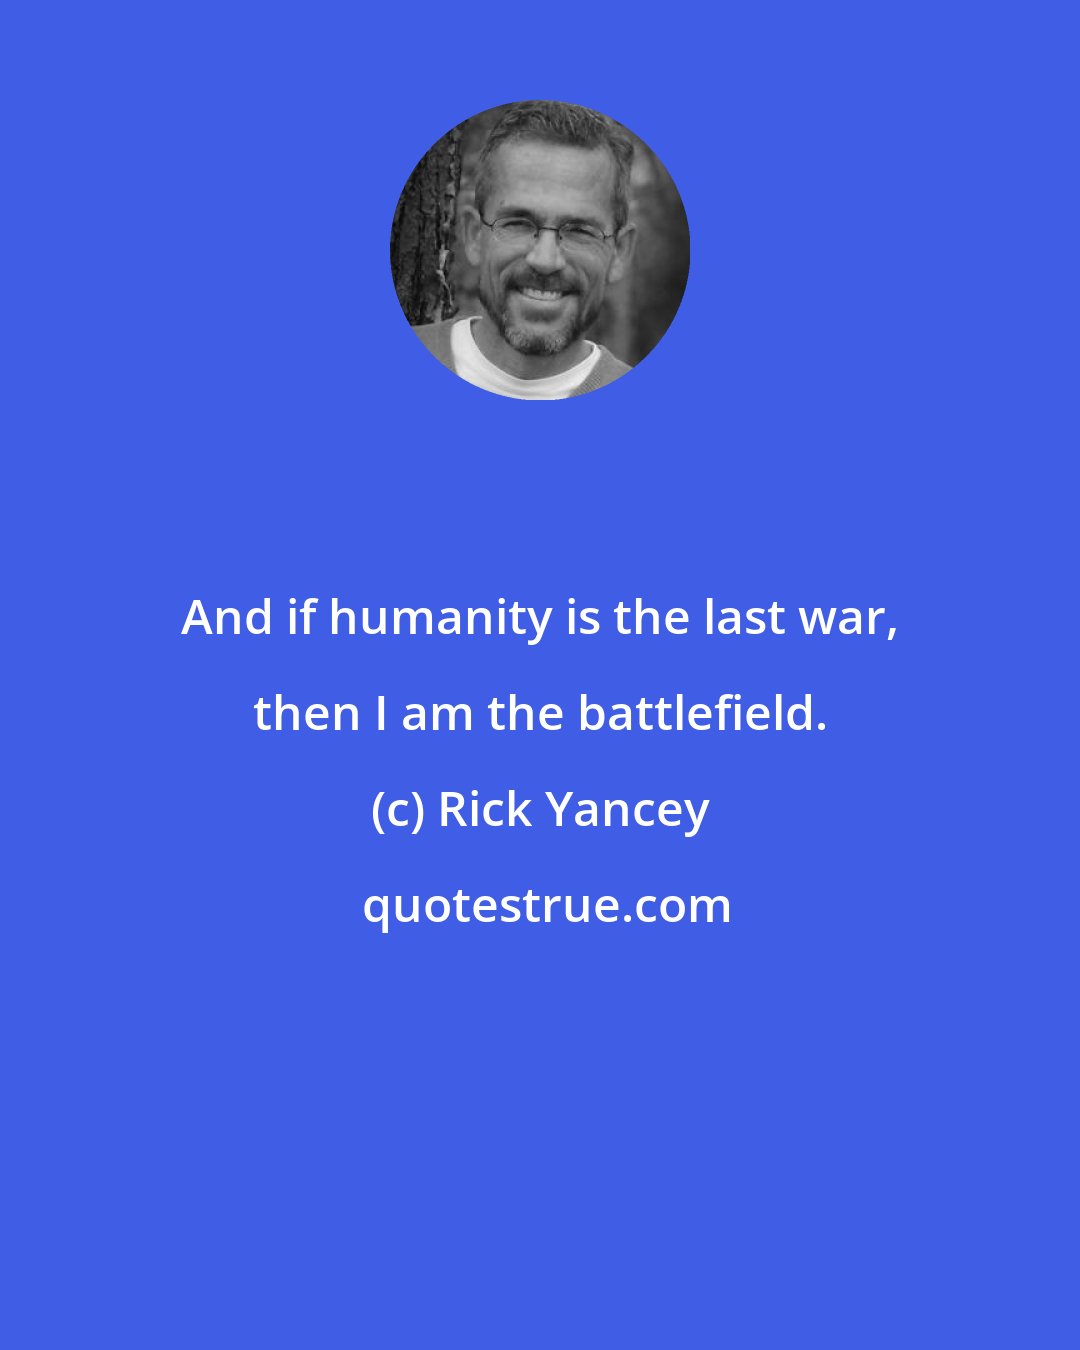 Rick Yancey: And if humanity is the last war, then I am the battlefield.